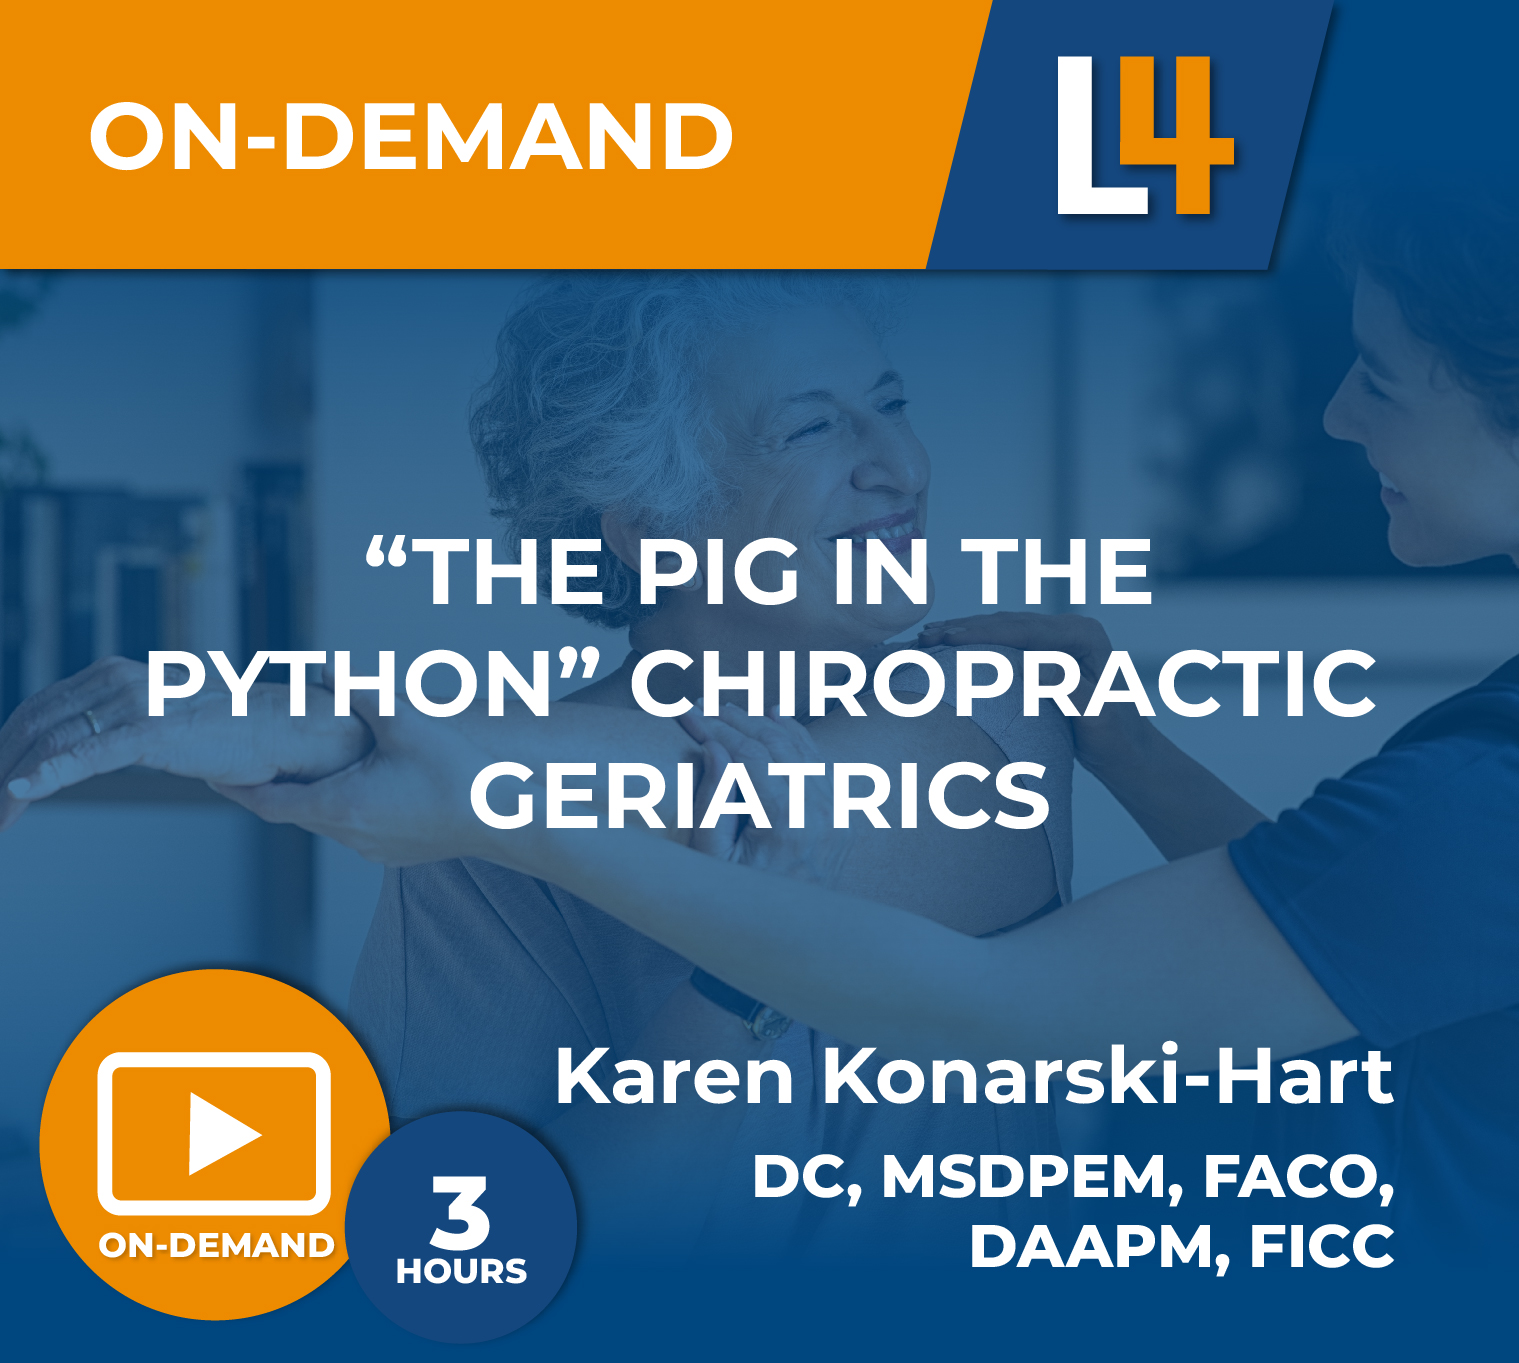 Chiropractic Geriatrics: The Pig in the Python